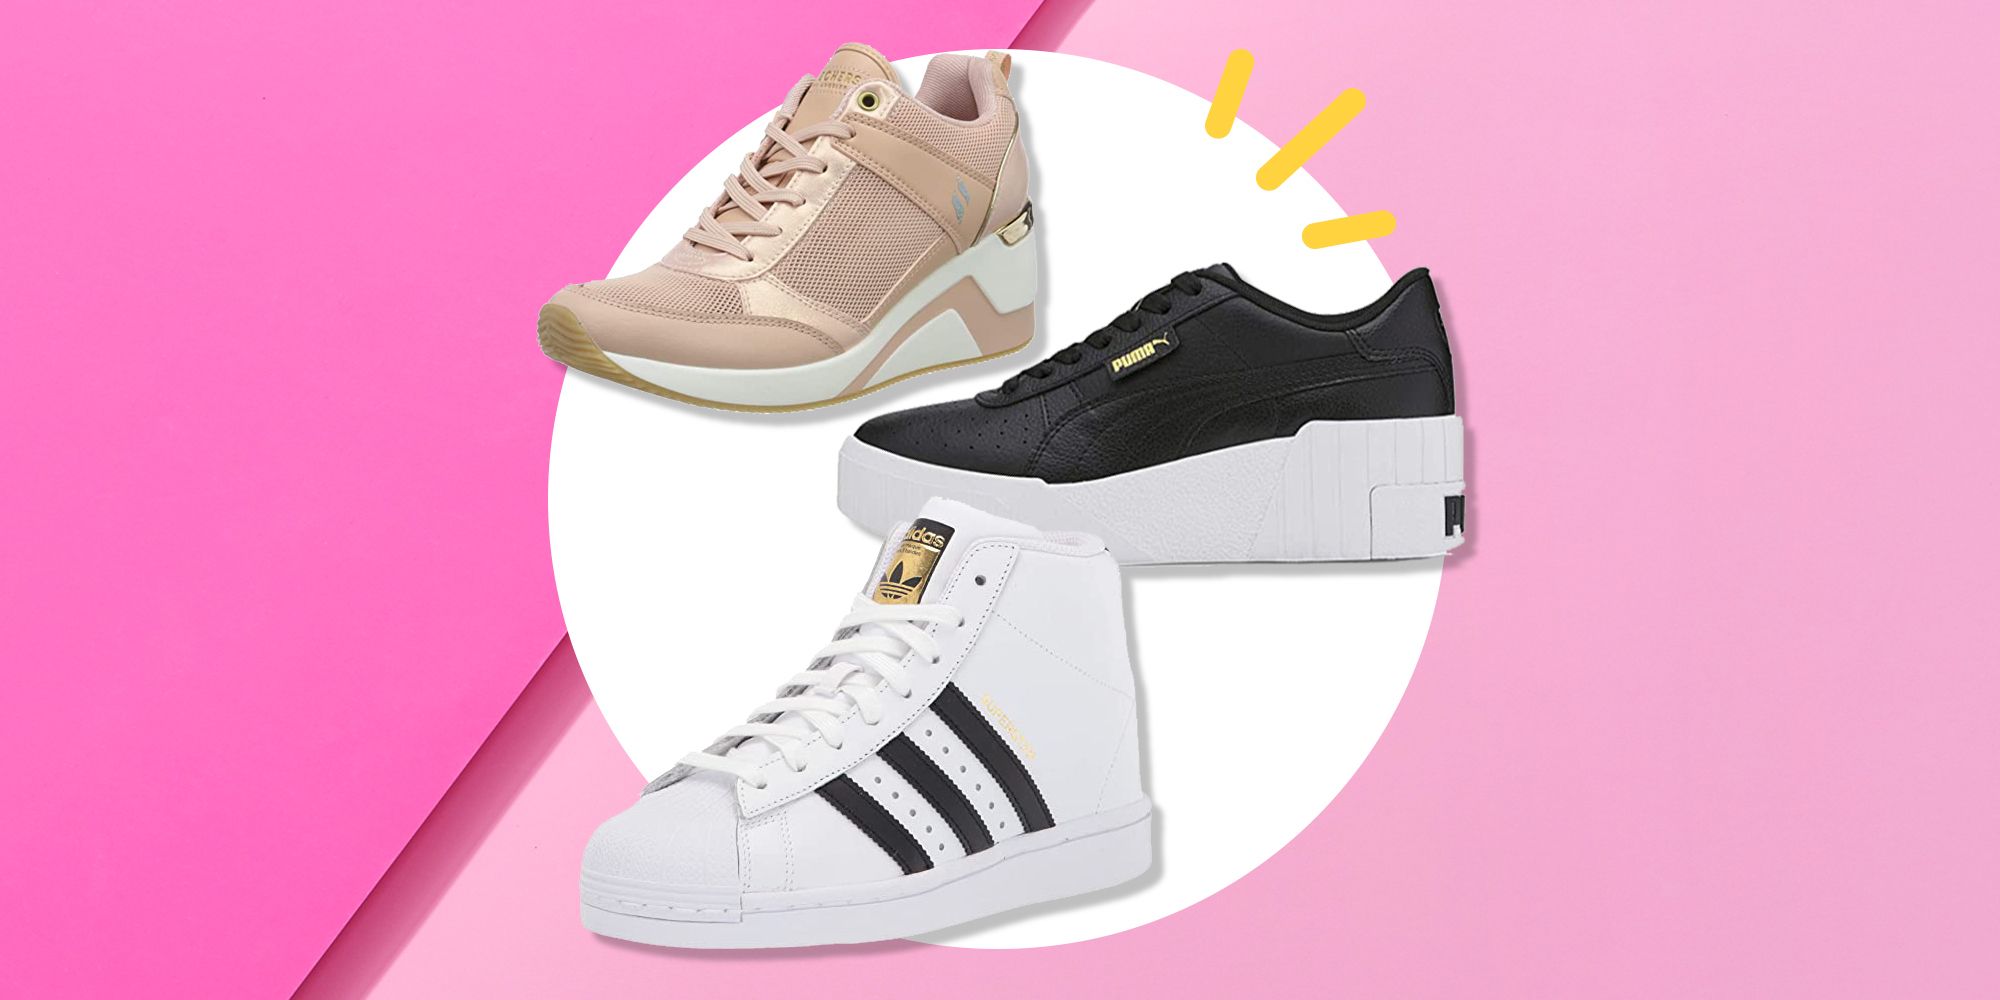 Academy laundry microphone 11 Best Wedge Sneakers In 2022 For Comfort And Style Year-Round